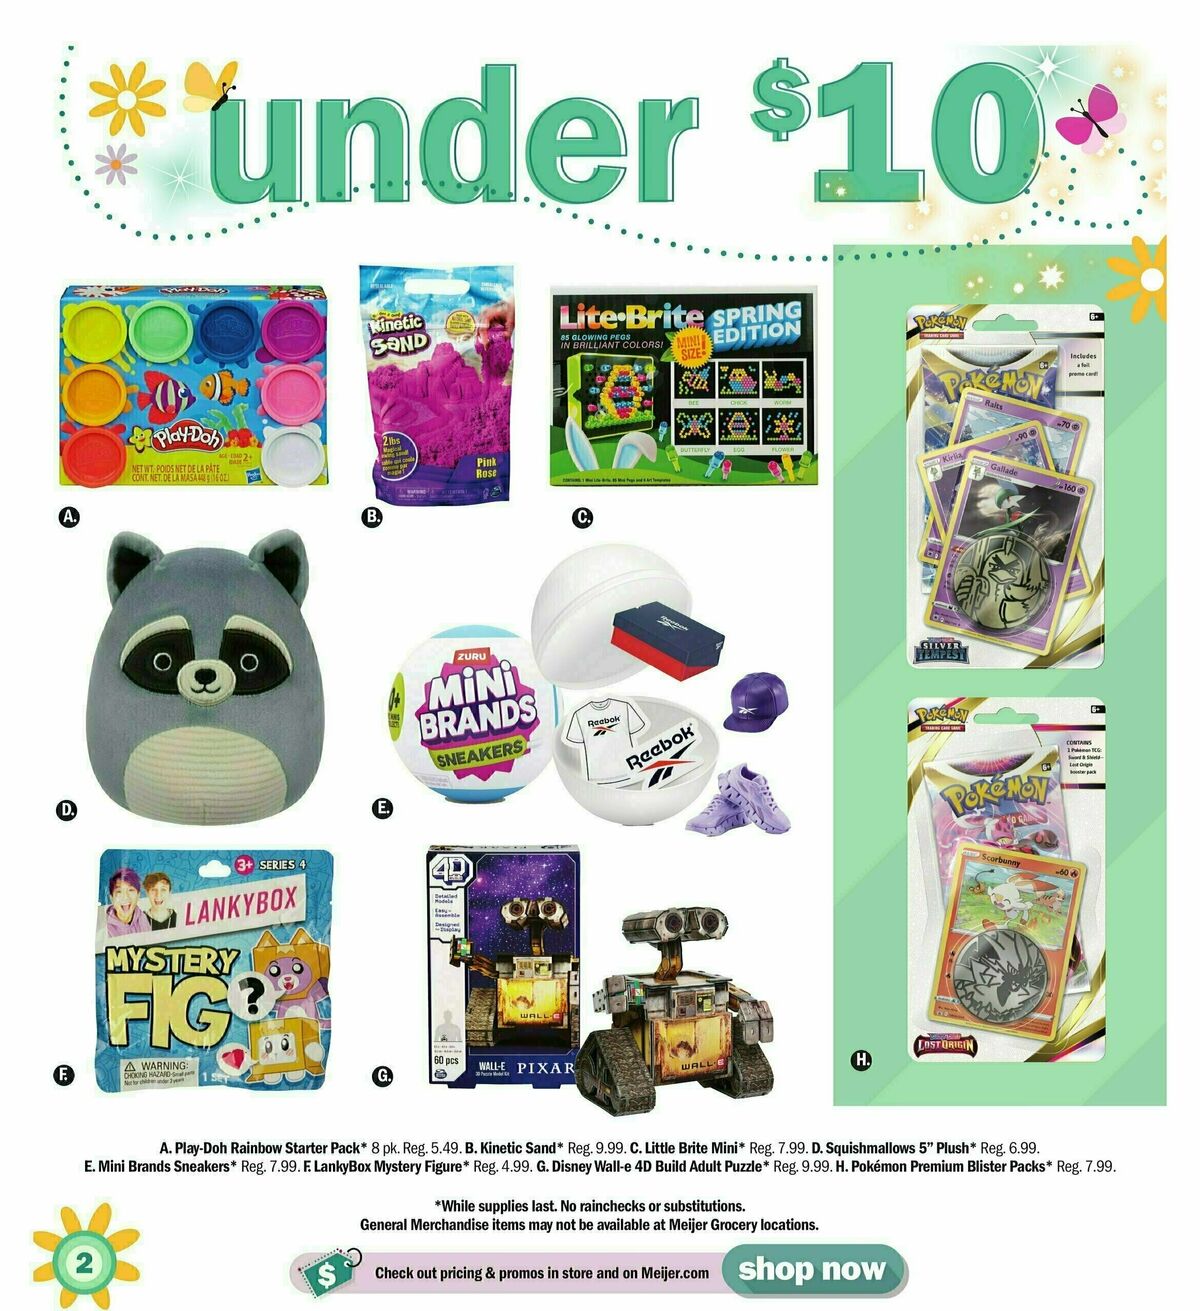 Meijer Easter Toy Guide Weekly Ad from March 17